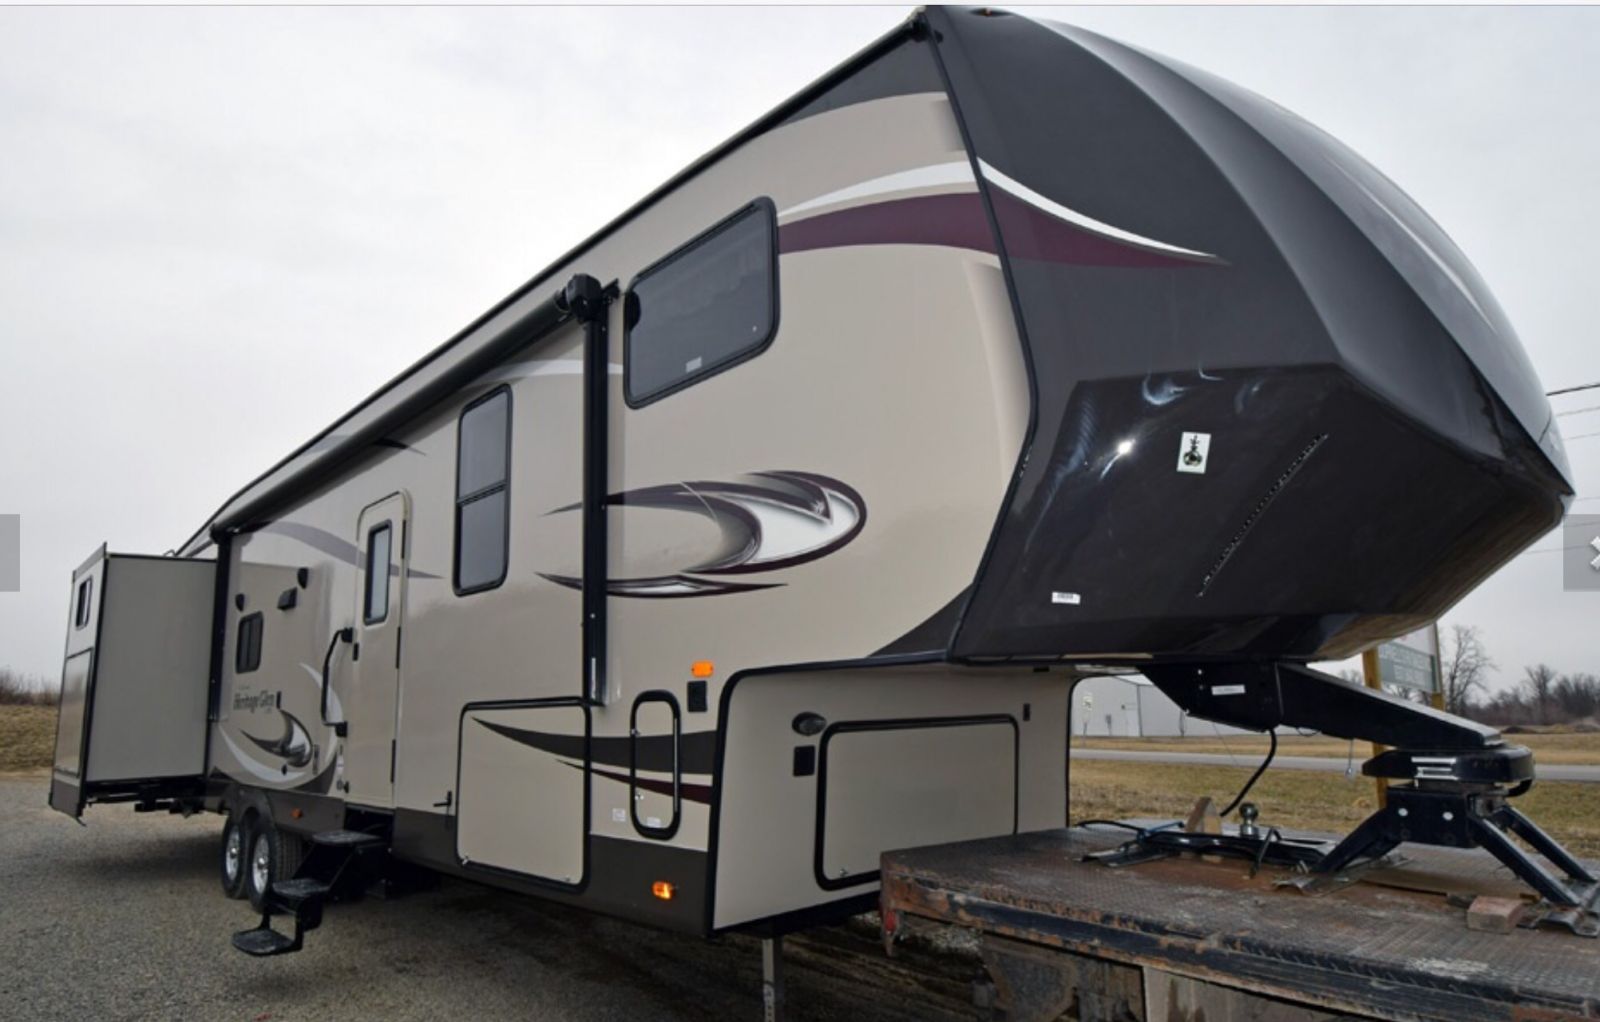 New 5th Wheel for Indian Lake